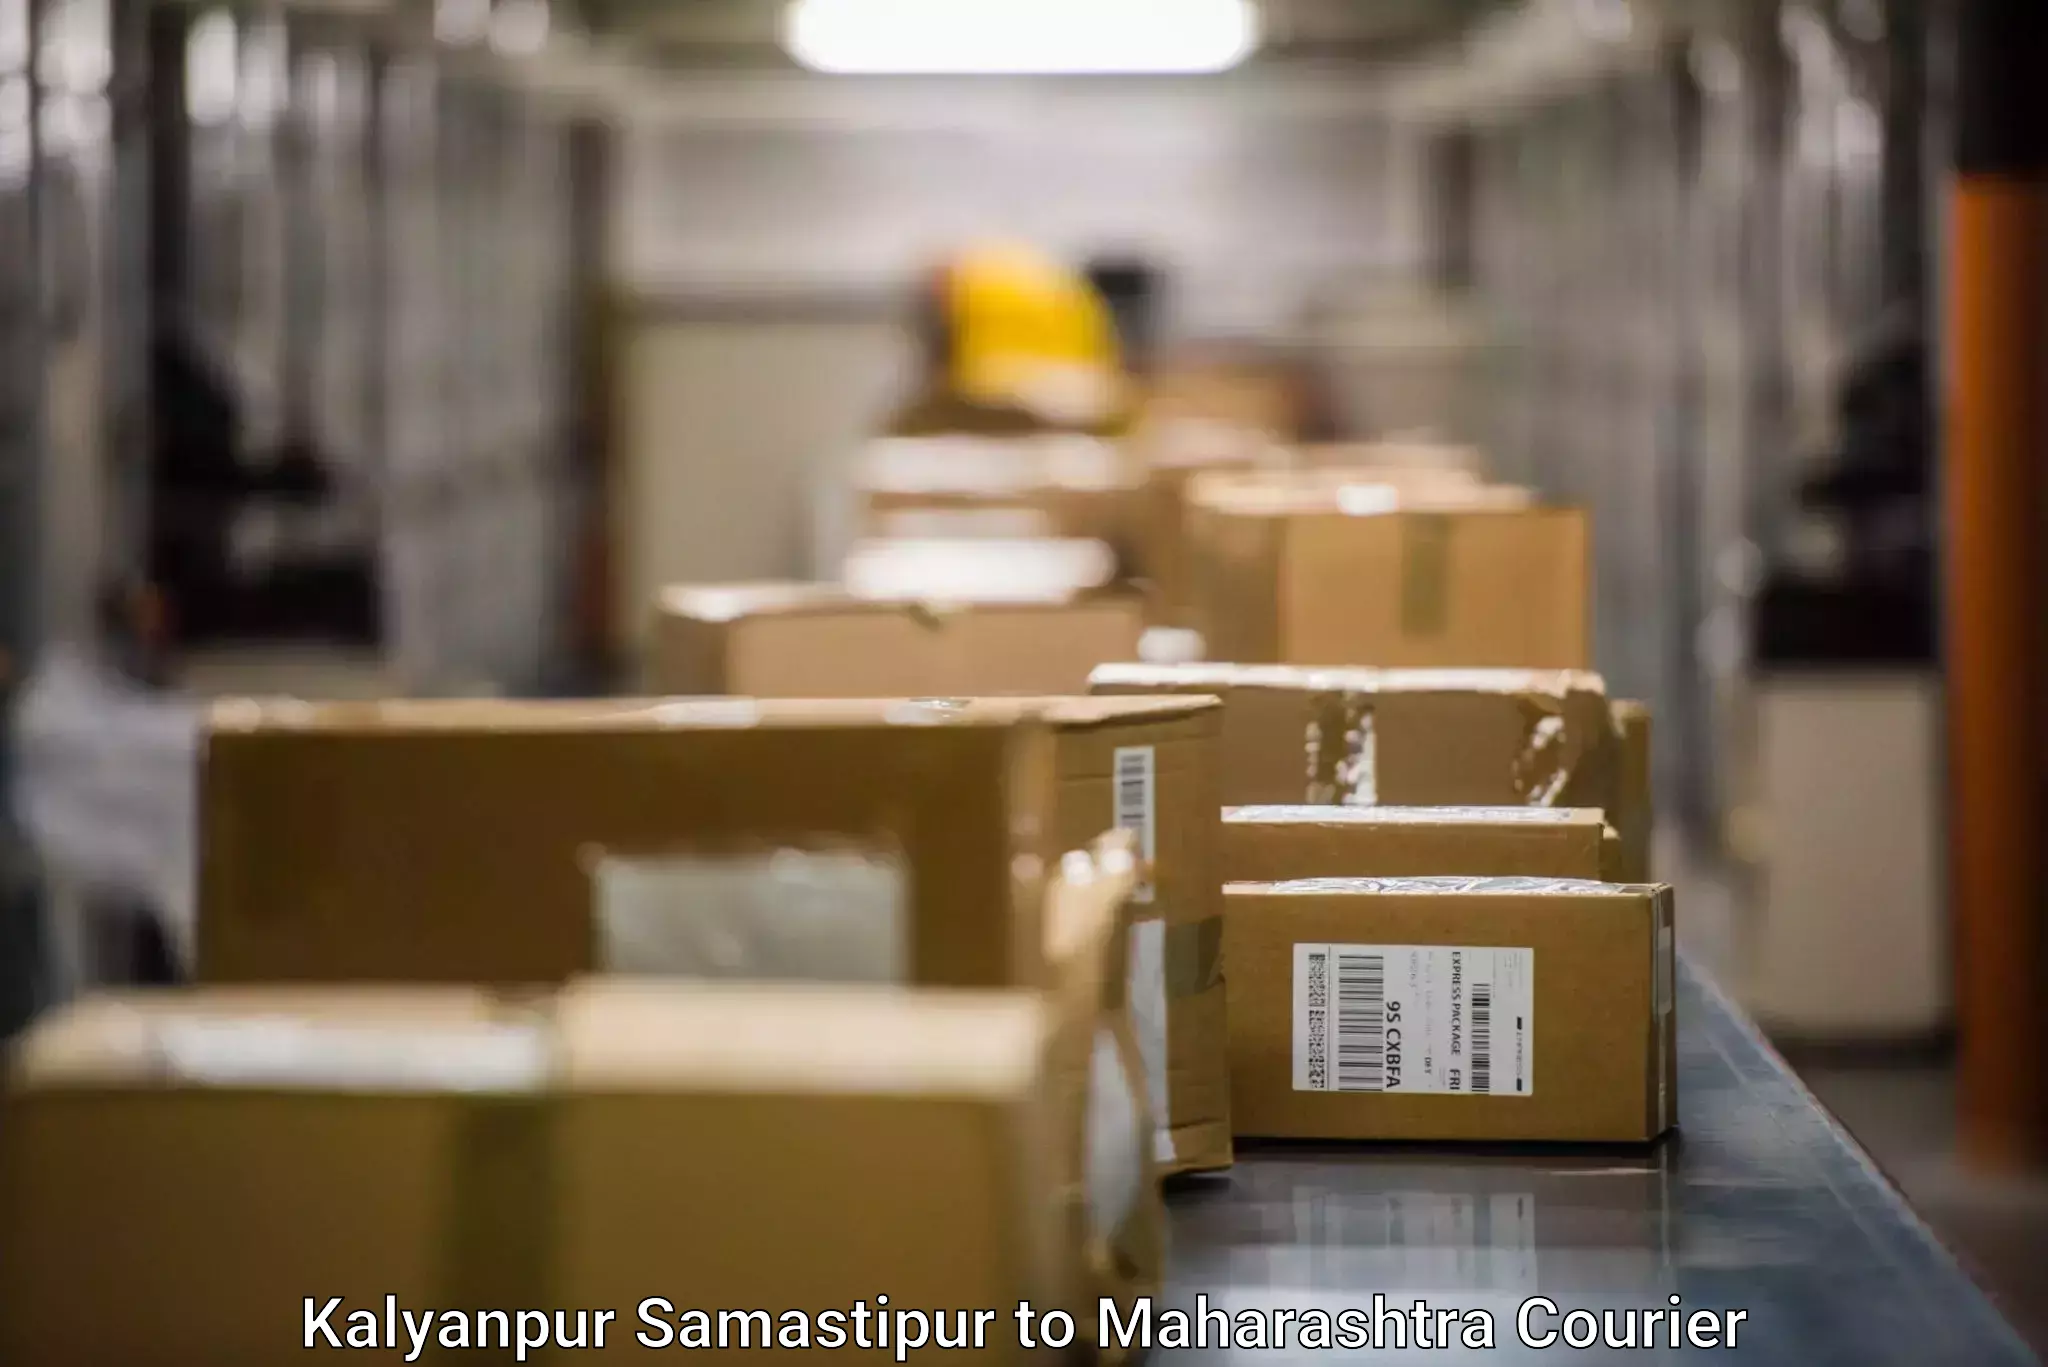 State-of-the-art courier technology Kalyanpur Samastipur to Mantha